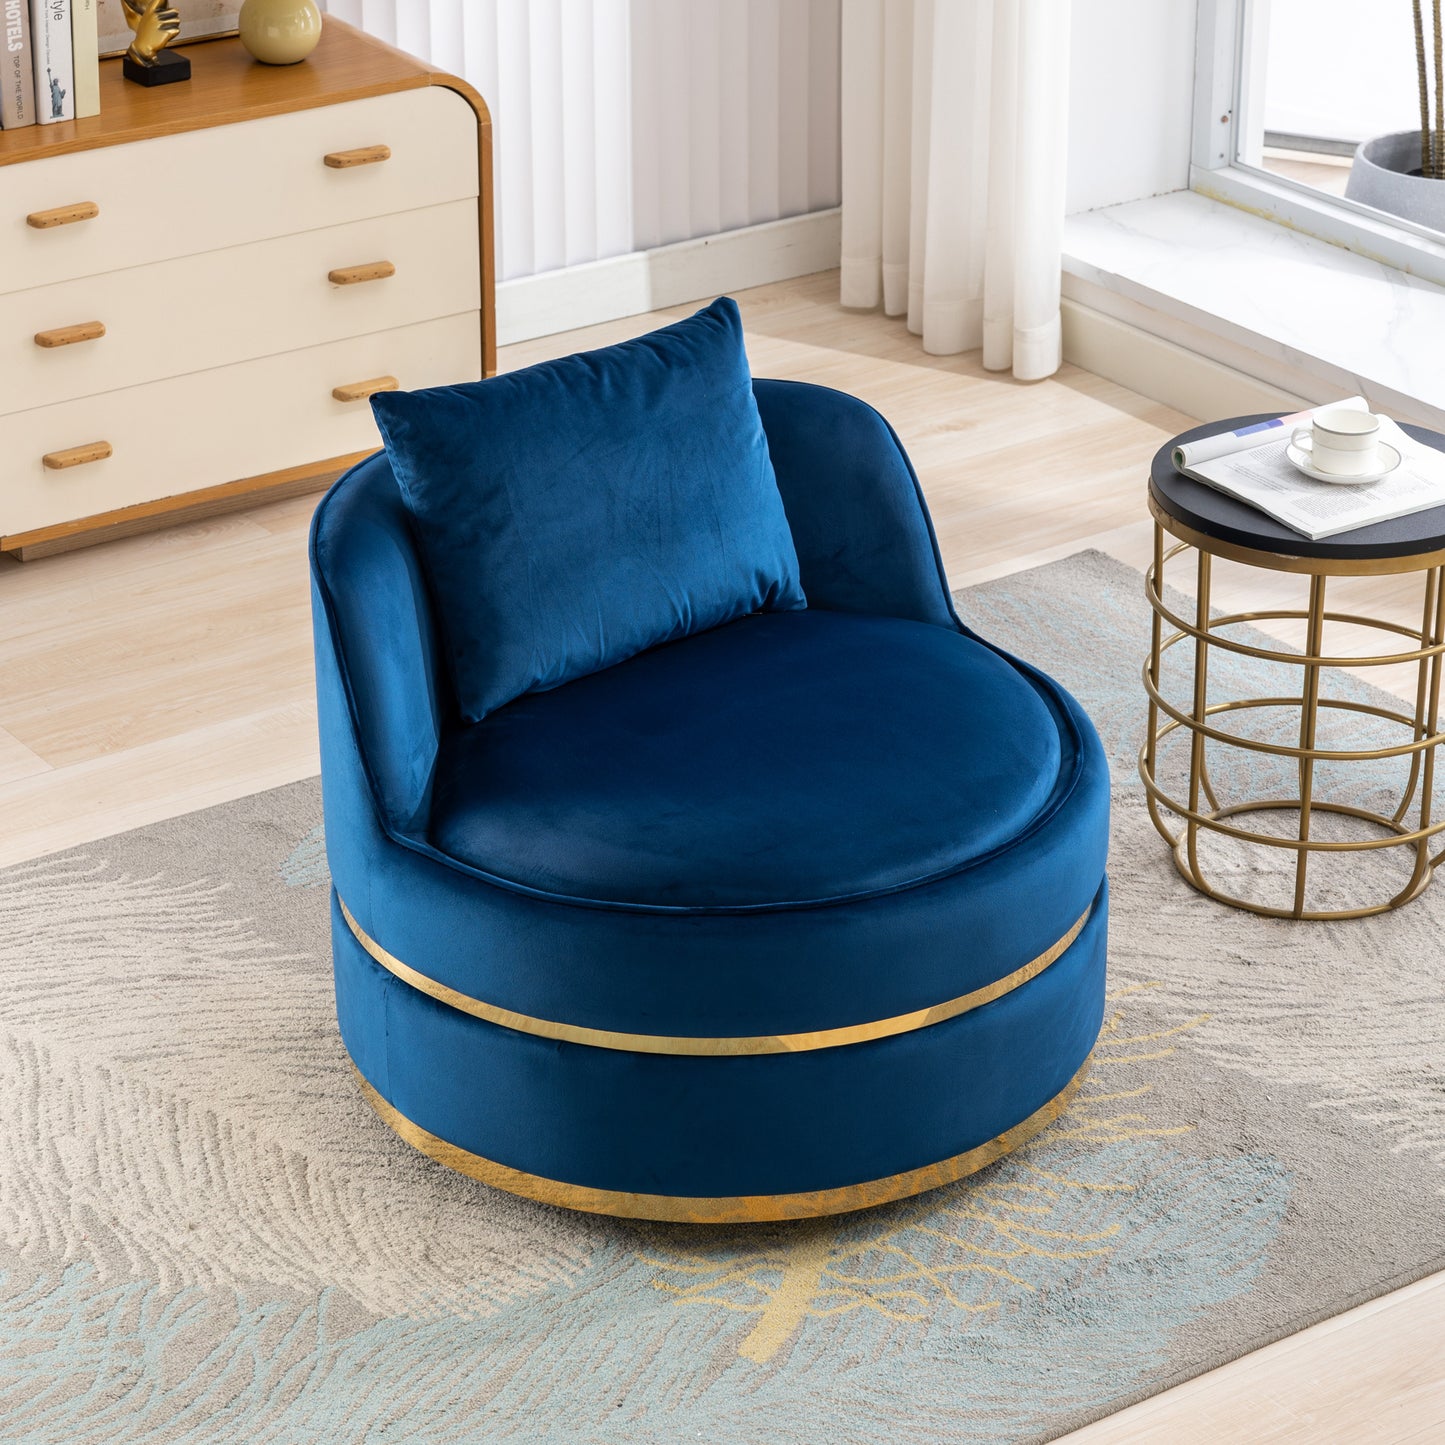 360 Degree Swivel Velvet Accent Chair, Barrel Chair Over-Sized Soft Chair with Seat Cushion, Blue